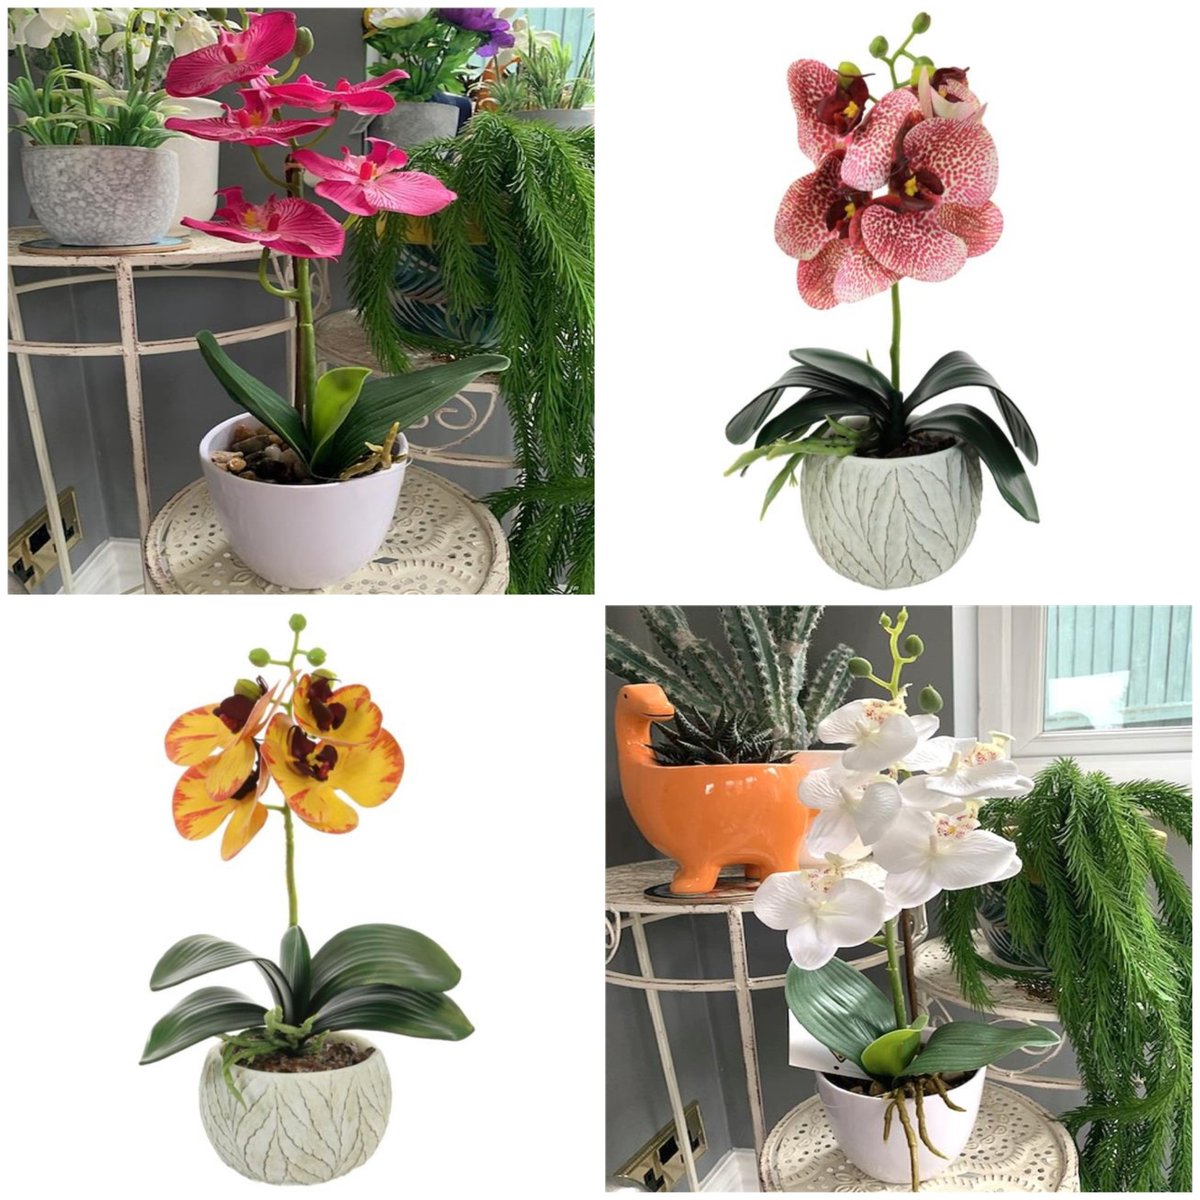 Perfect teacher gifts to say thank you - check out our gorgeous range of potted orchids! 💮

Shop direct 👉 bit.ly/3MTtqNA
Shop ebay 👉 bit.ly/43l1SrF 

#teacher #teacherthankyou #teachergift #teachergifts #giftideas #ThankYou #MHHSBD